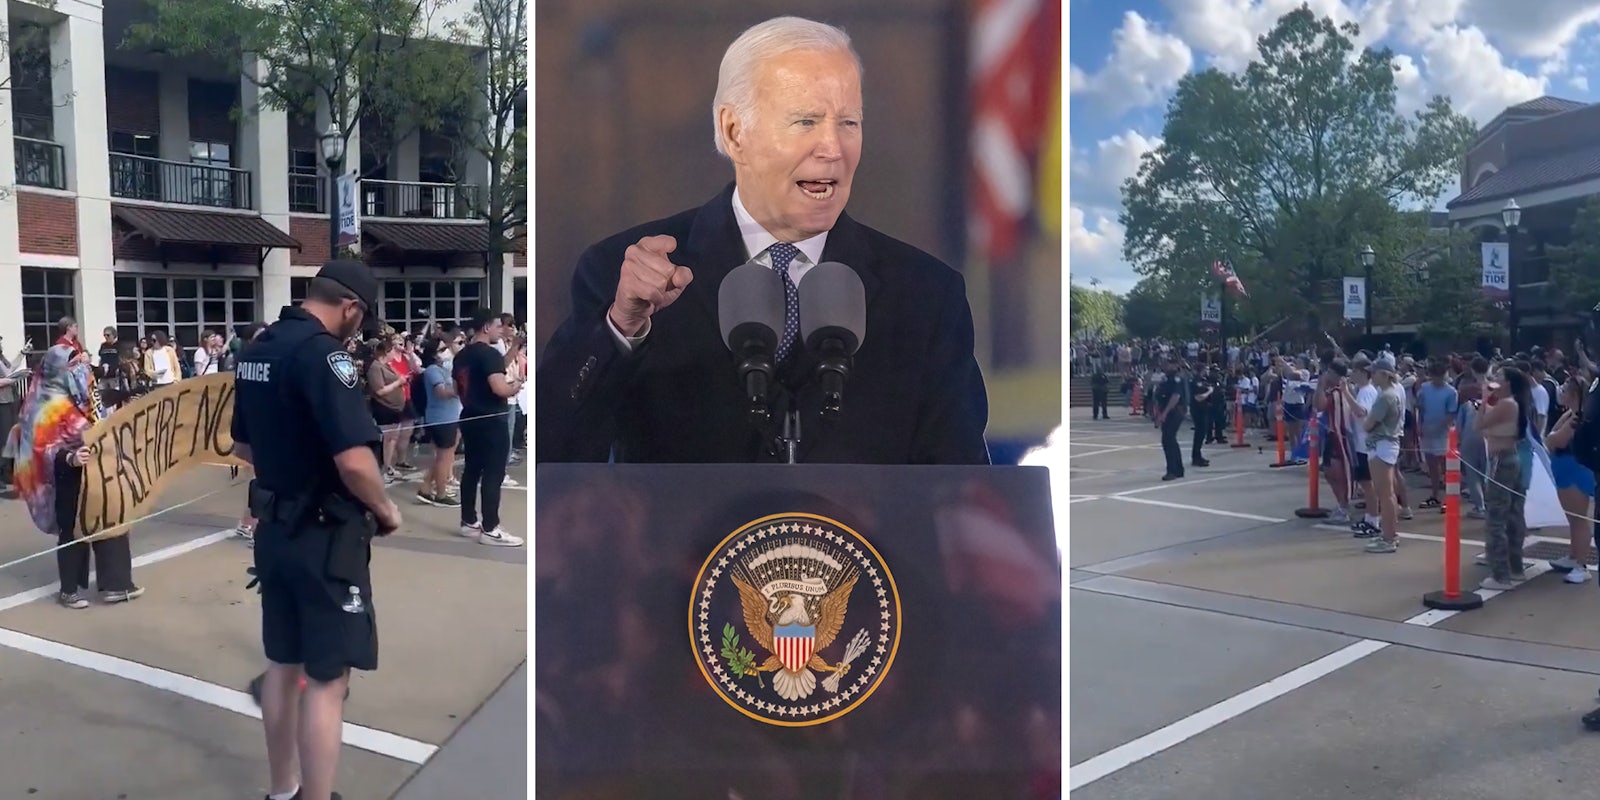 Pro-Palestine protesters and Trump supporters find common ground, chant 'F*** Joe Biden' in viral video